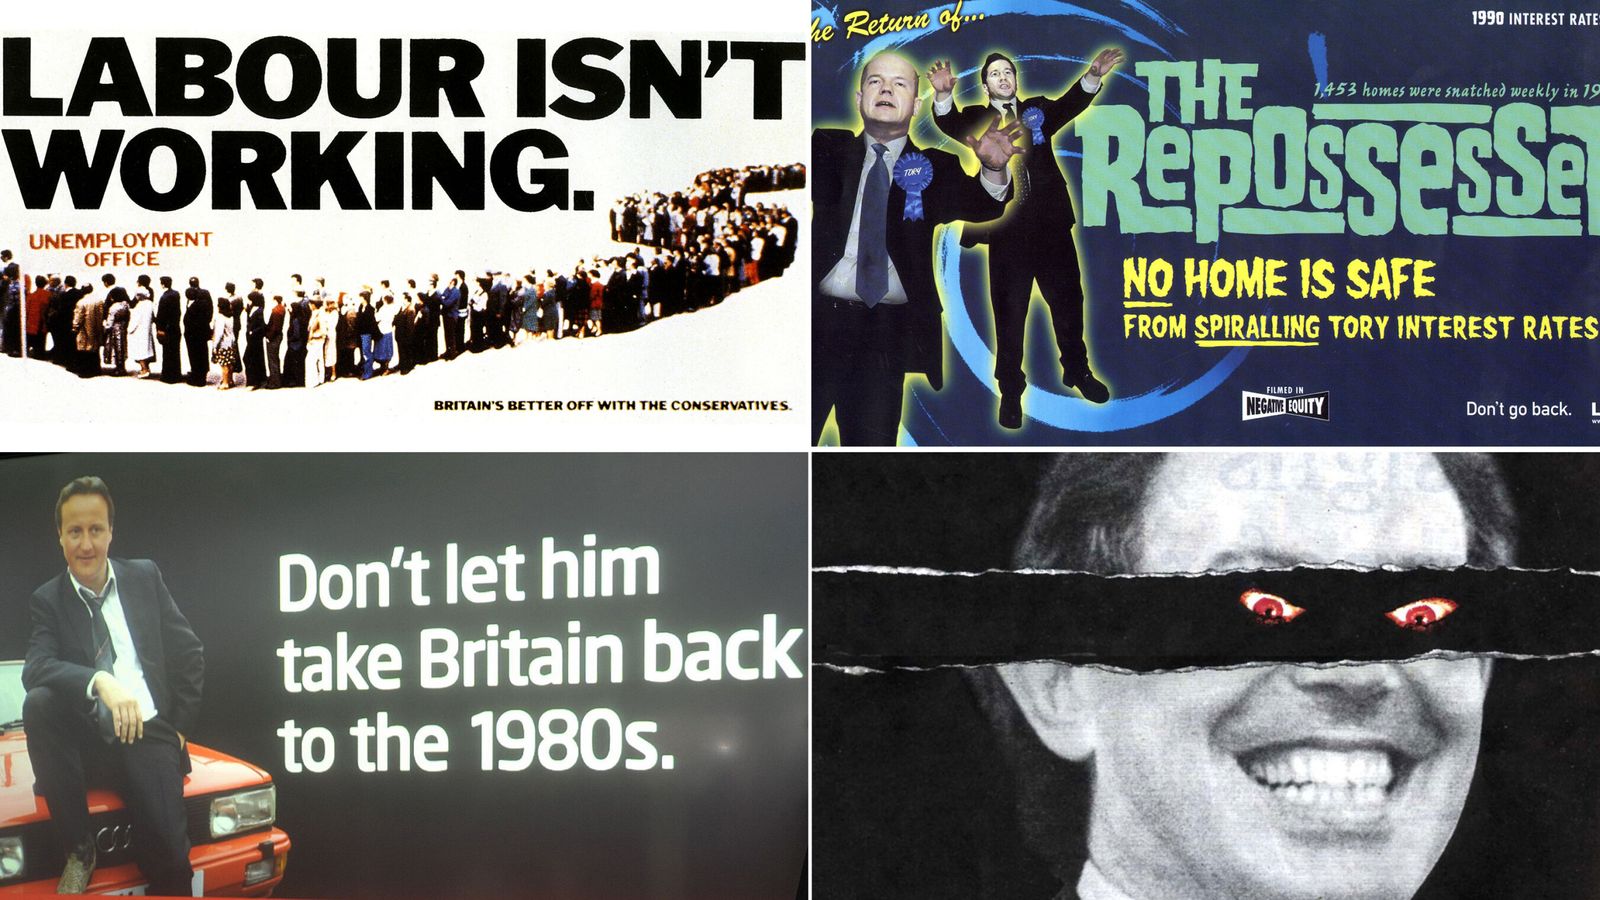 Labour 'attack ads', the political campaigns that have cut through and their impact on elections